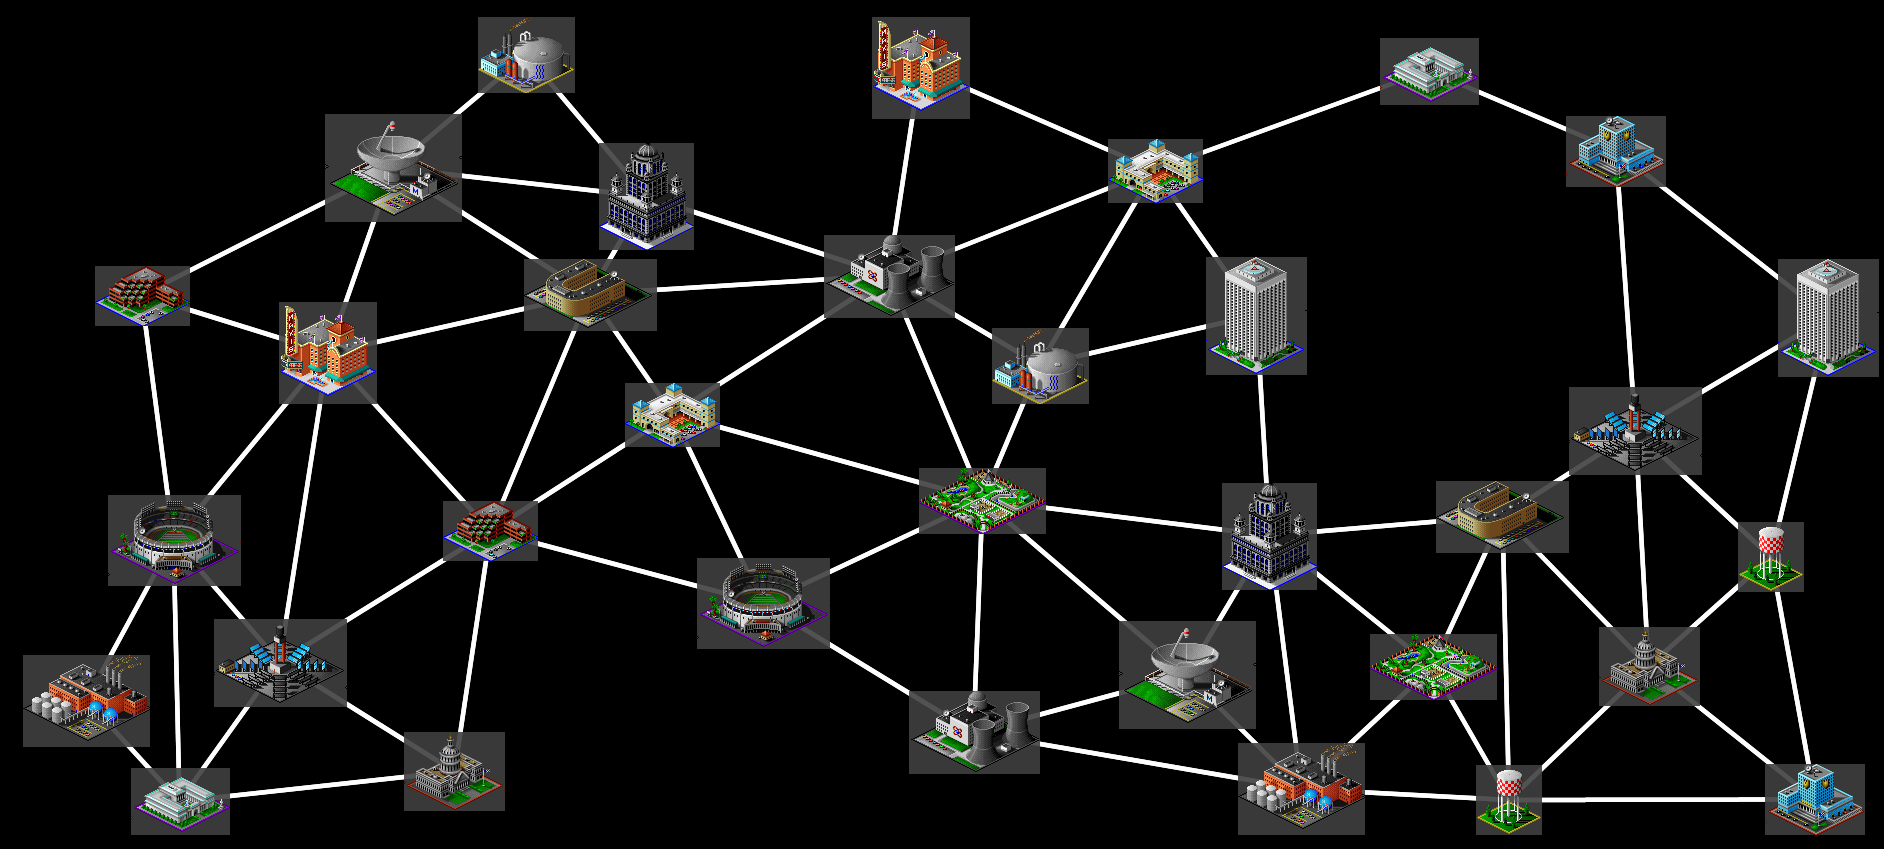 Screenshot of tableaunoir showcasing magnets to illustrate large graph algorithms, using Sim City icons for nodes